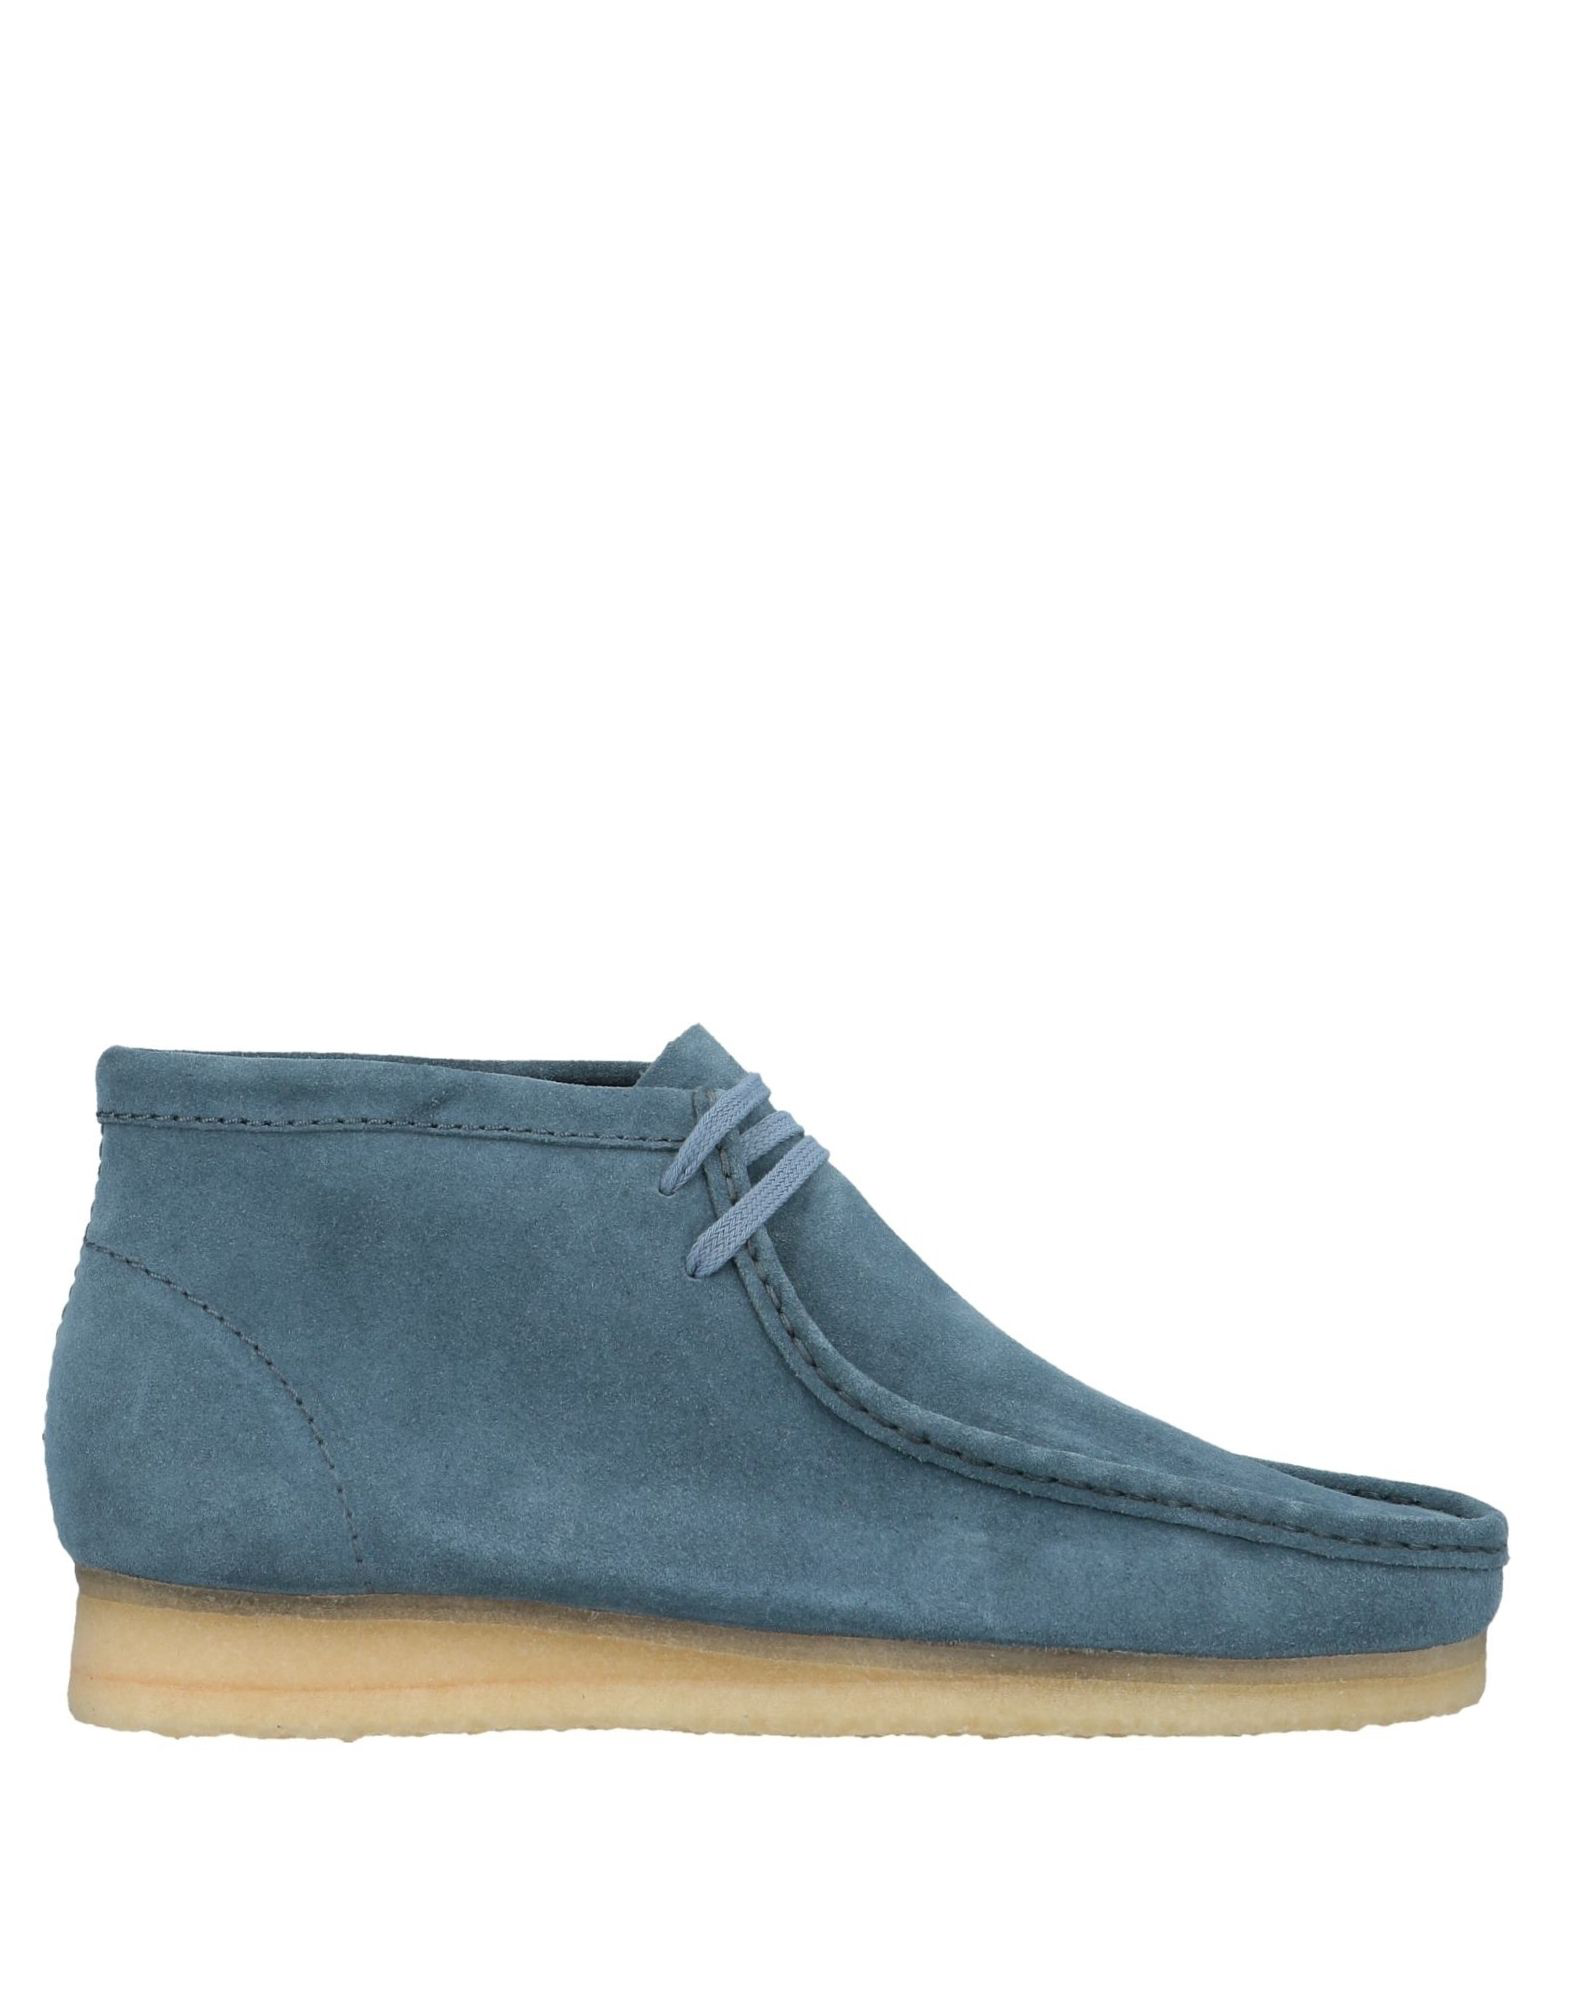 Clarks Originals Ankle Boots In Pastel Blue | ModeSens